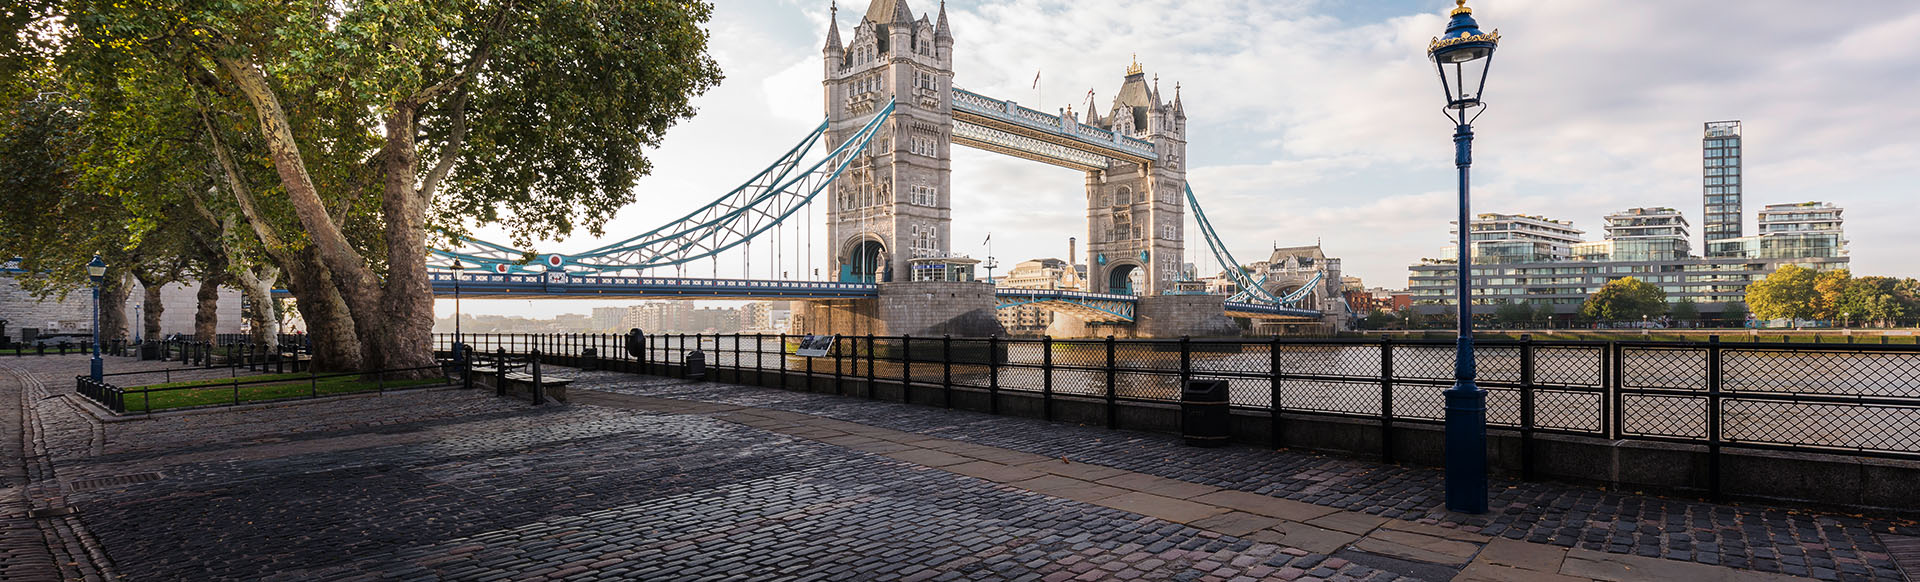 A view of Tower Bridge with a cobbled walkway, lamp-post and tree in the foreground.